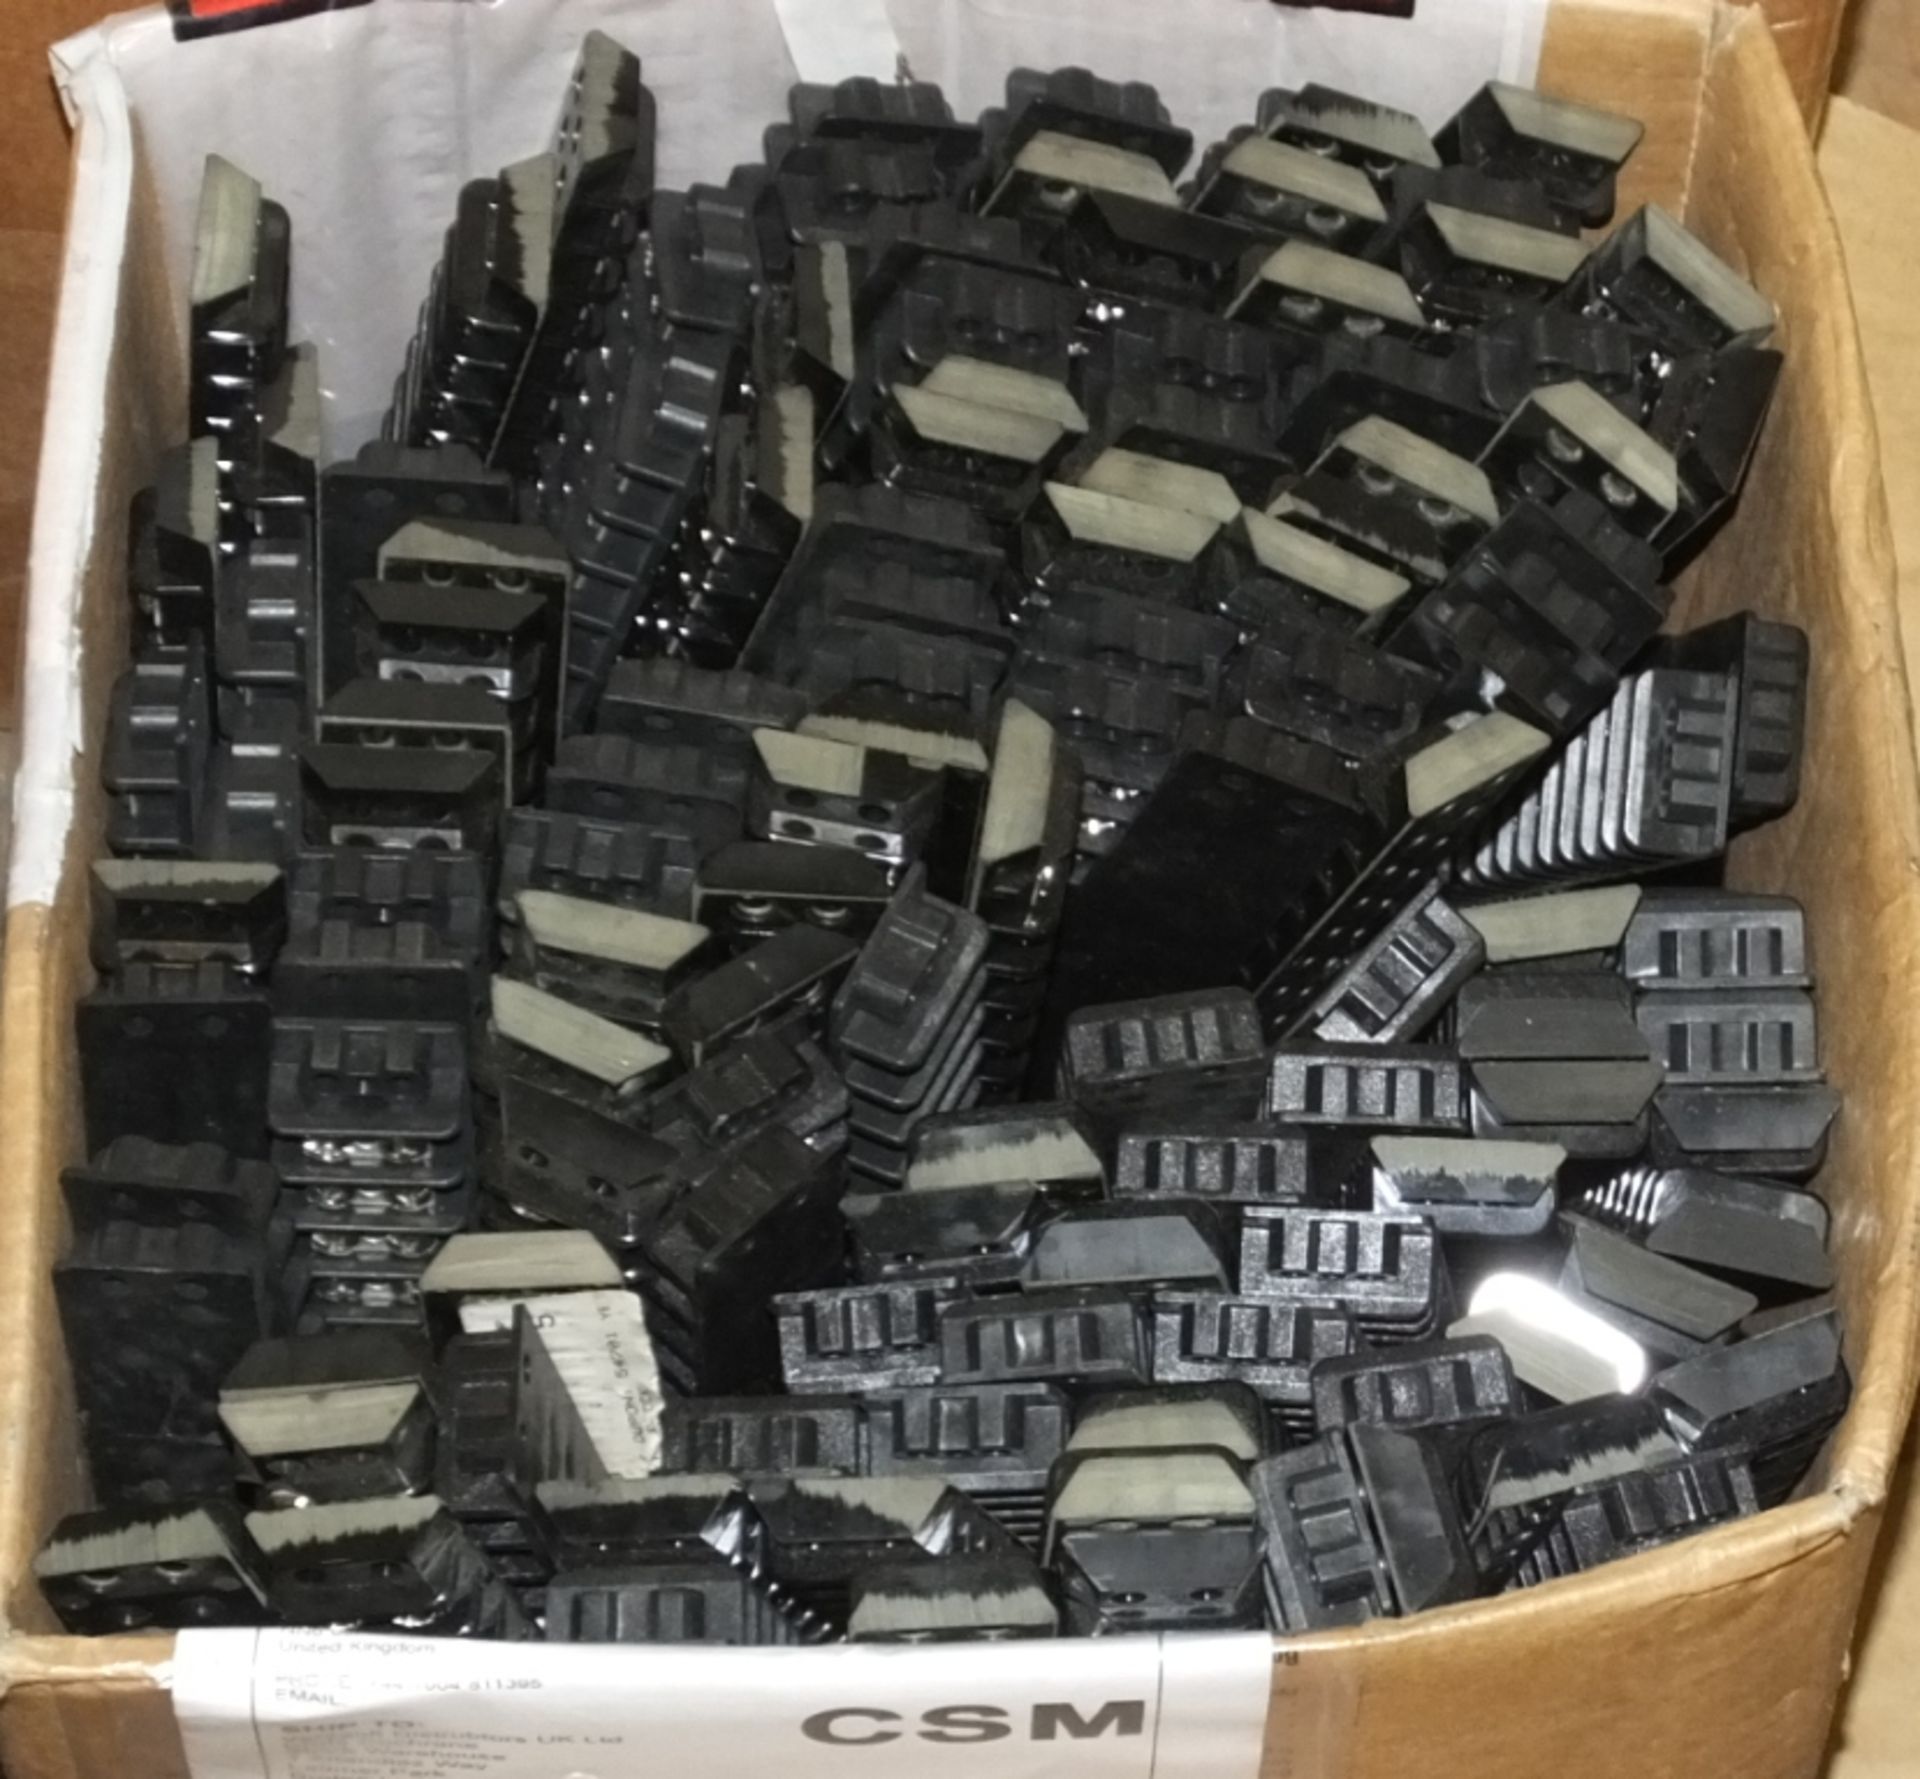 5x Boxes of Heavy Duty Cable Strip Connectors - Image 5 of 6